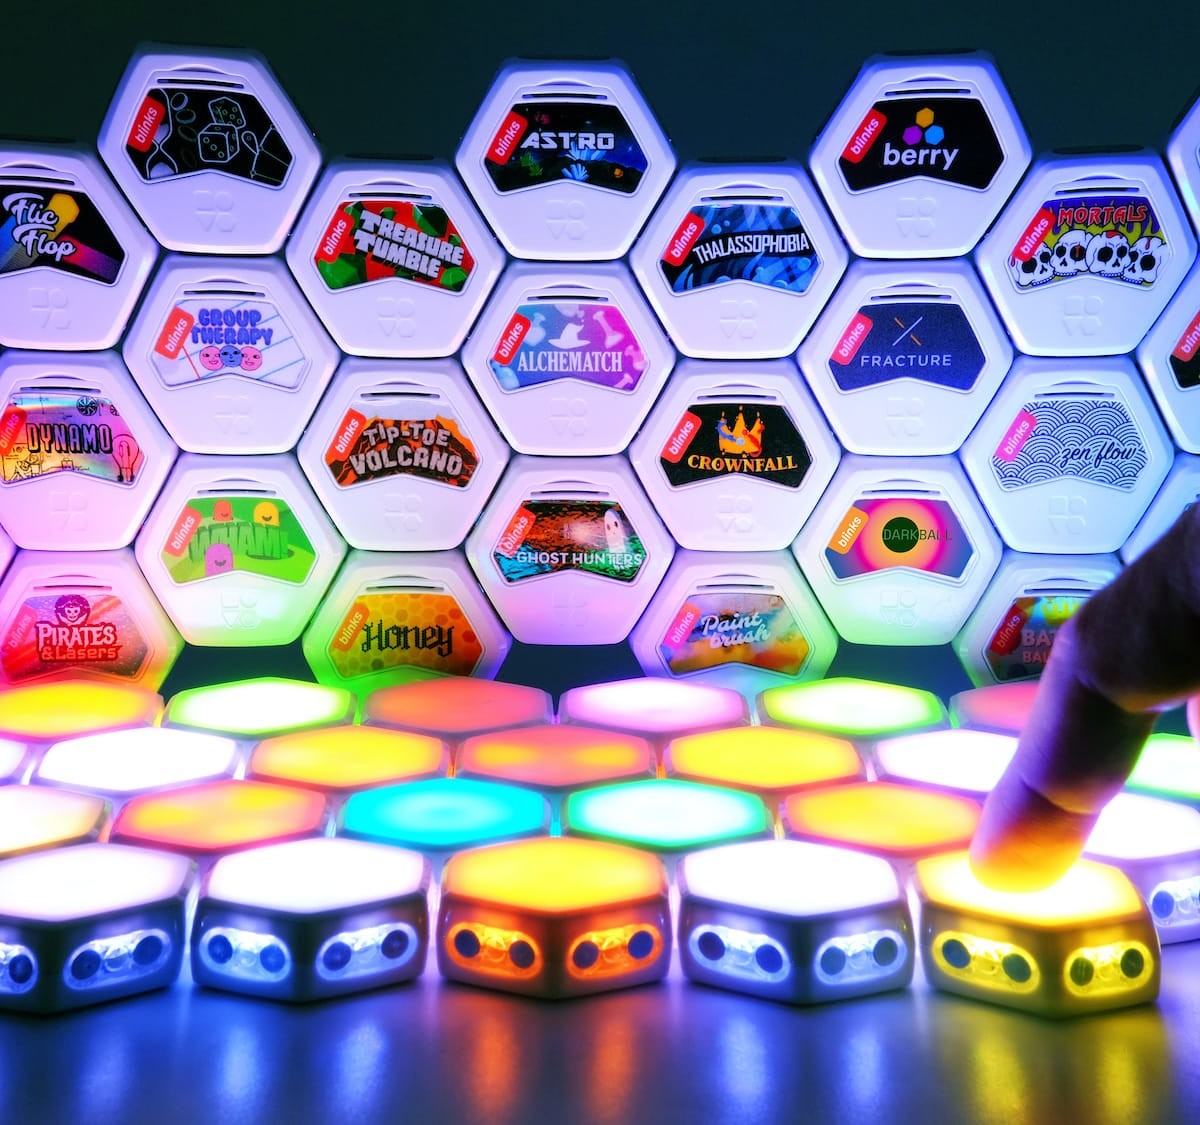 Blinks by Move38 smart tabletop game system has futuristic, touch-sensitive game pieces